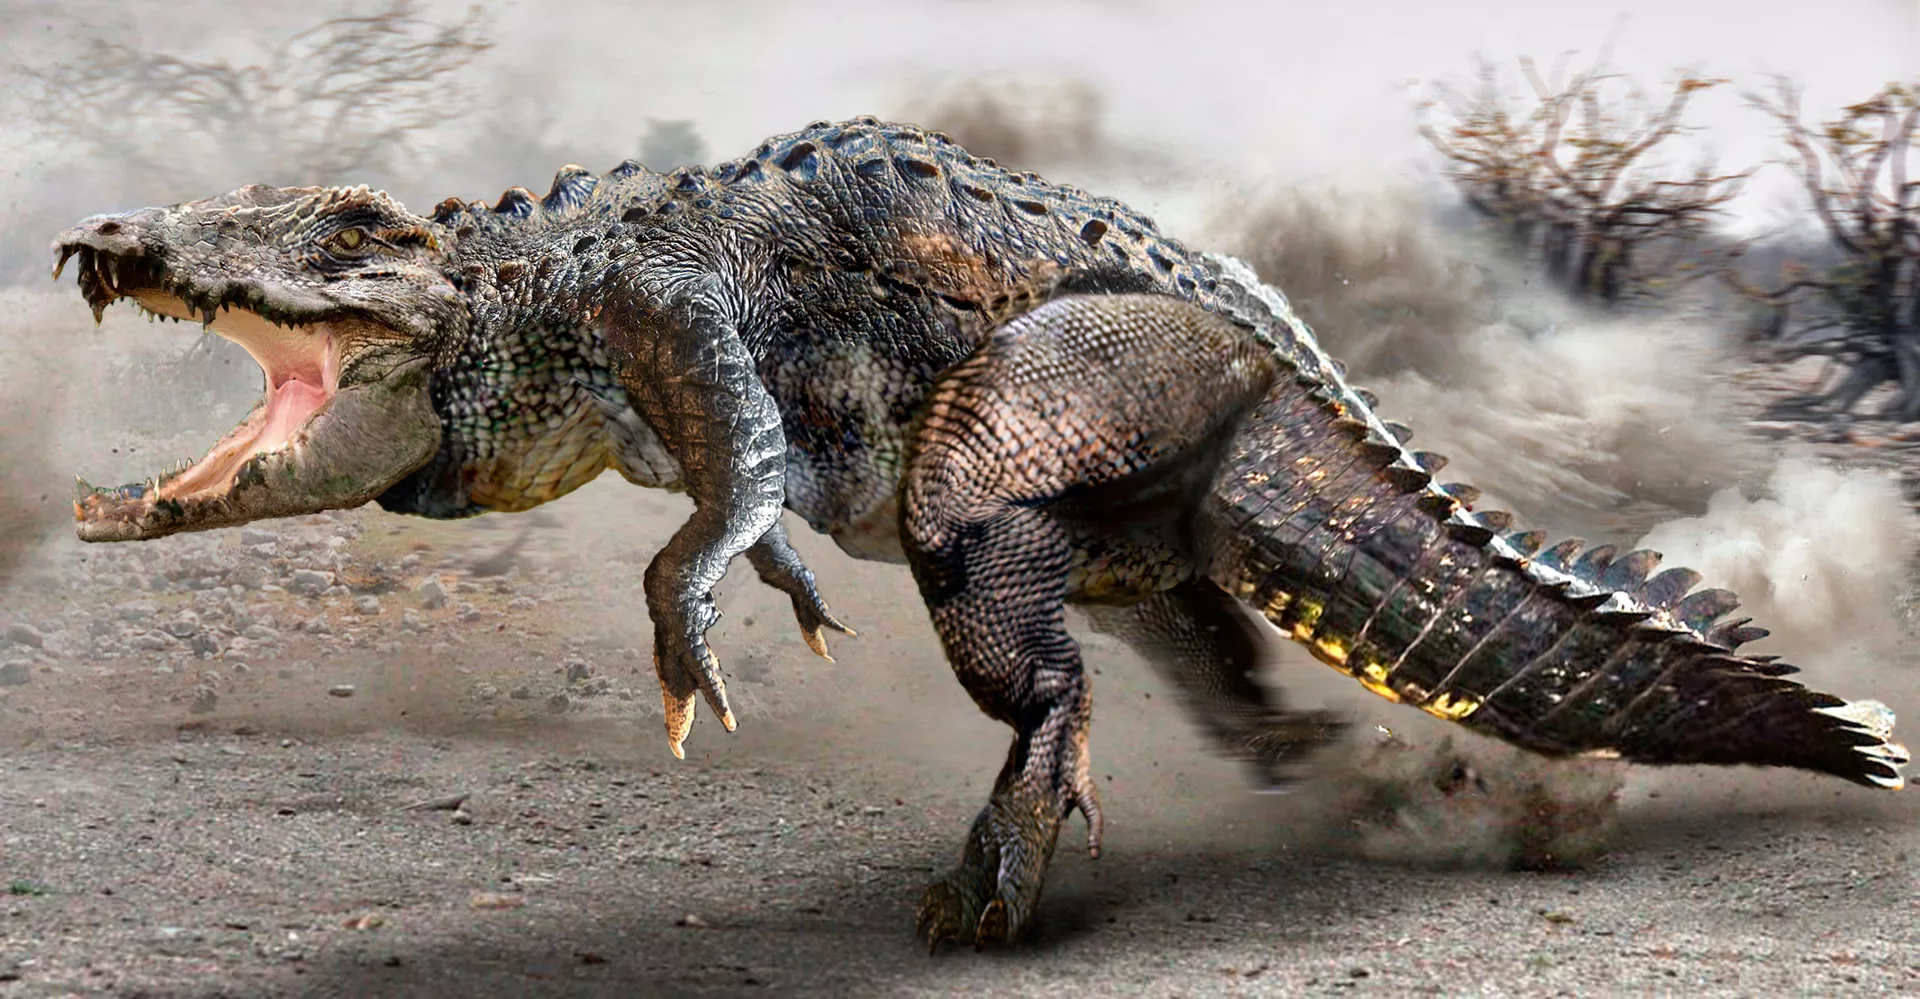 Are Crocodiles Related To Dinosaurs?